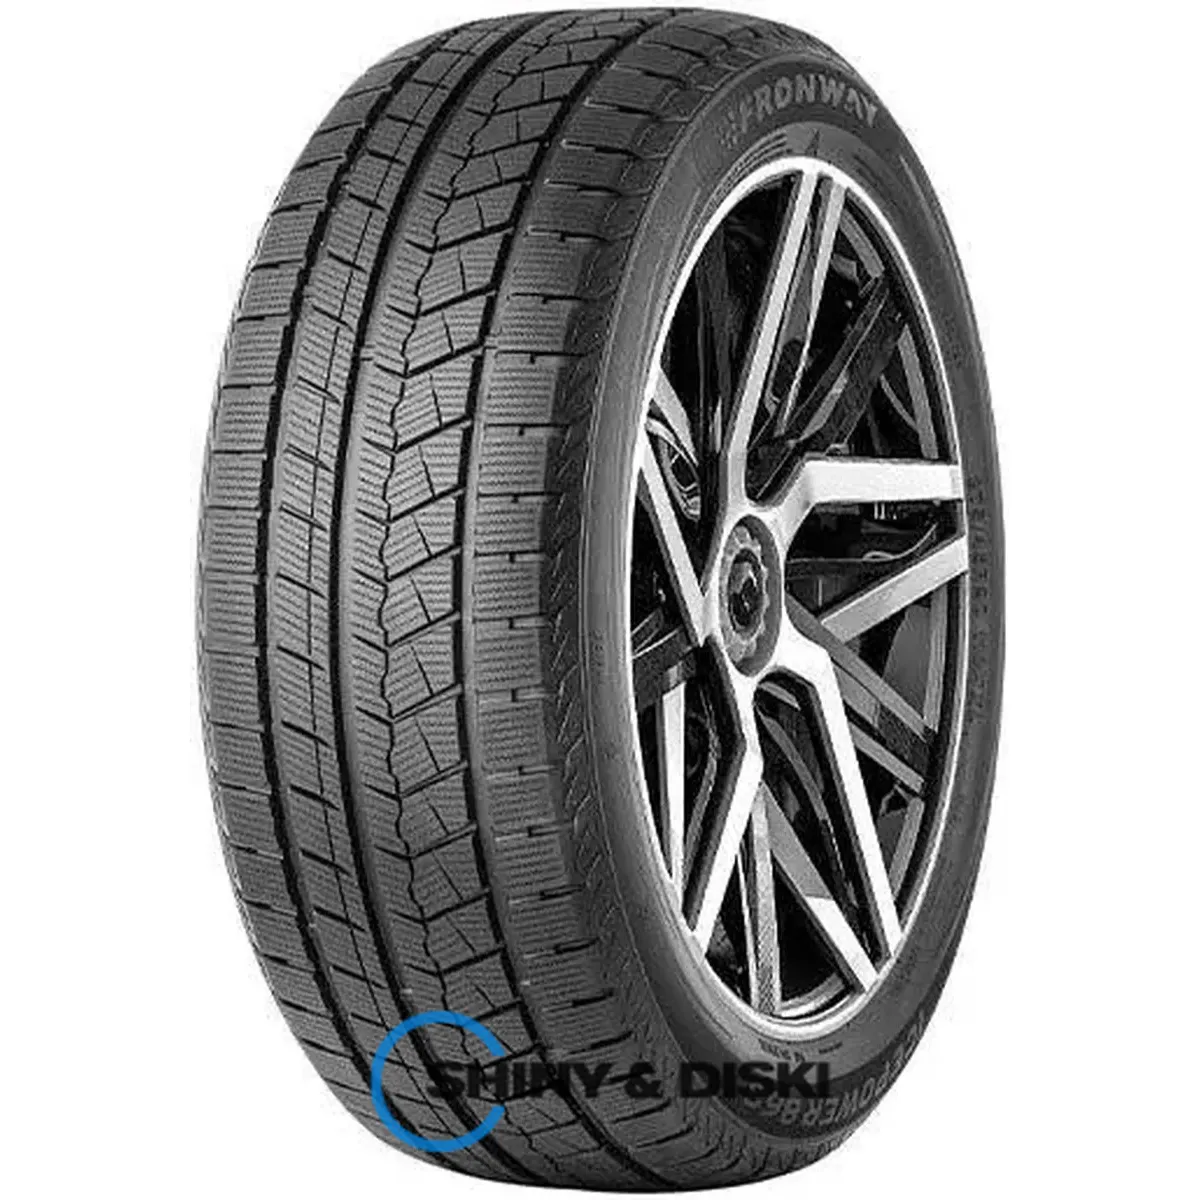 fronway icepower 868 215/60 r17 96h